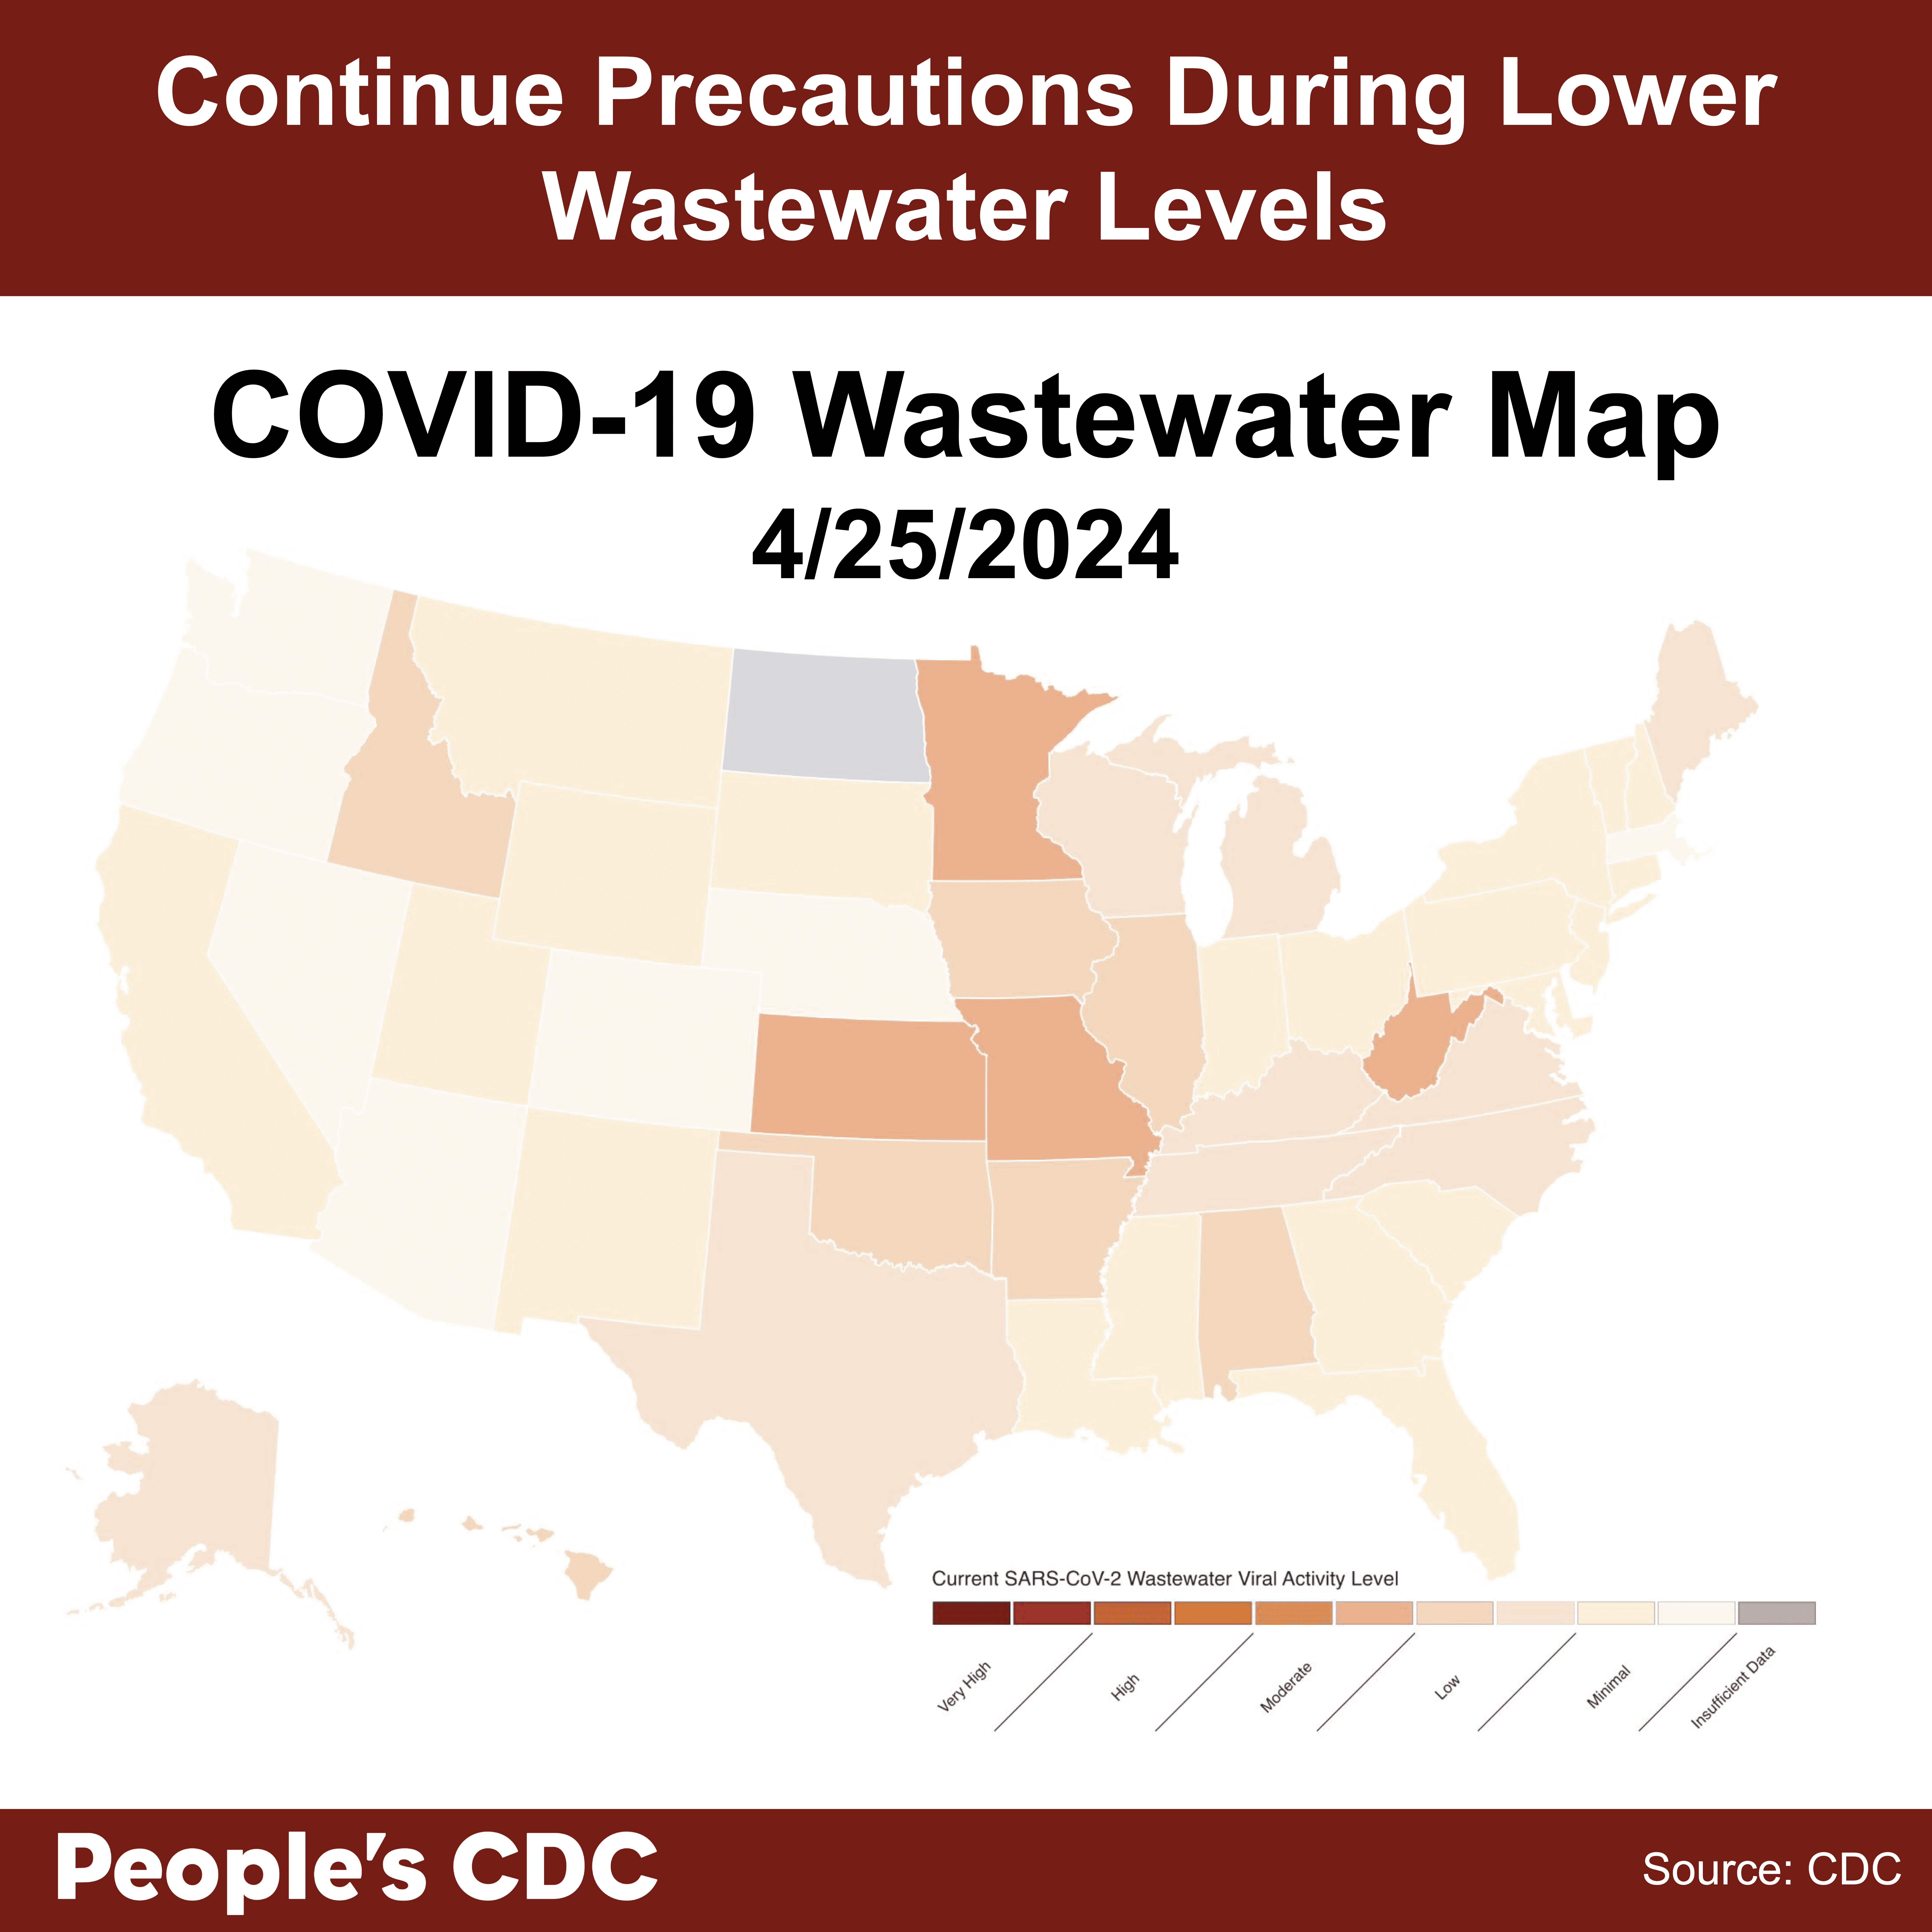 A map of the United States color-coded in shades of orange and gray displaying SARS-CoV-2 Wastewater Viral Activity level as of April 25, 2024, where deeper tones correlate to higher viral activity and gray indicates insufficient data. 5 states have ‘Moderate’ Wastewater Levels, and 2 states and 3 territories have insufficient data. Text above map reads “Continue Precautions During Lower Wastewater Levels. COVID-19 Wastewater Map 4/25/2024. People’s CDC. Source: CDC.” Graphic source: CDC